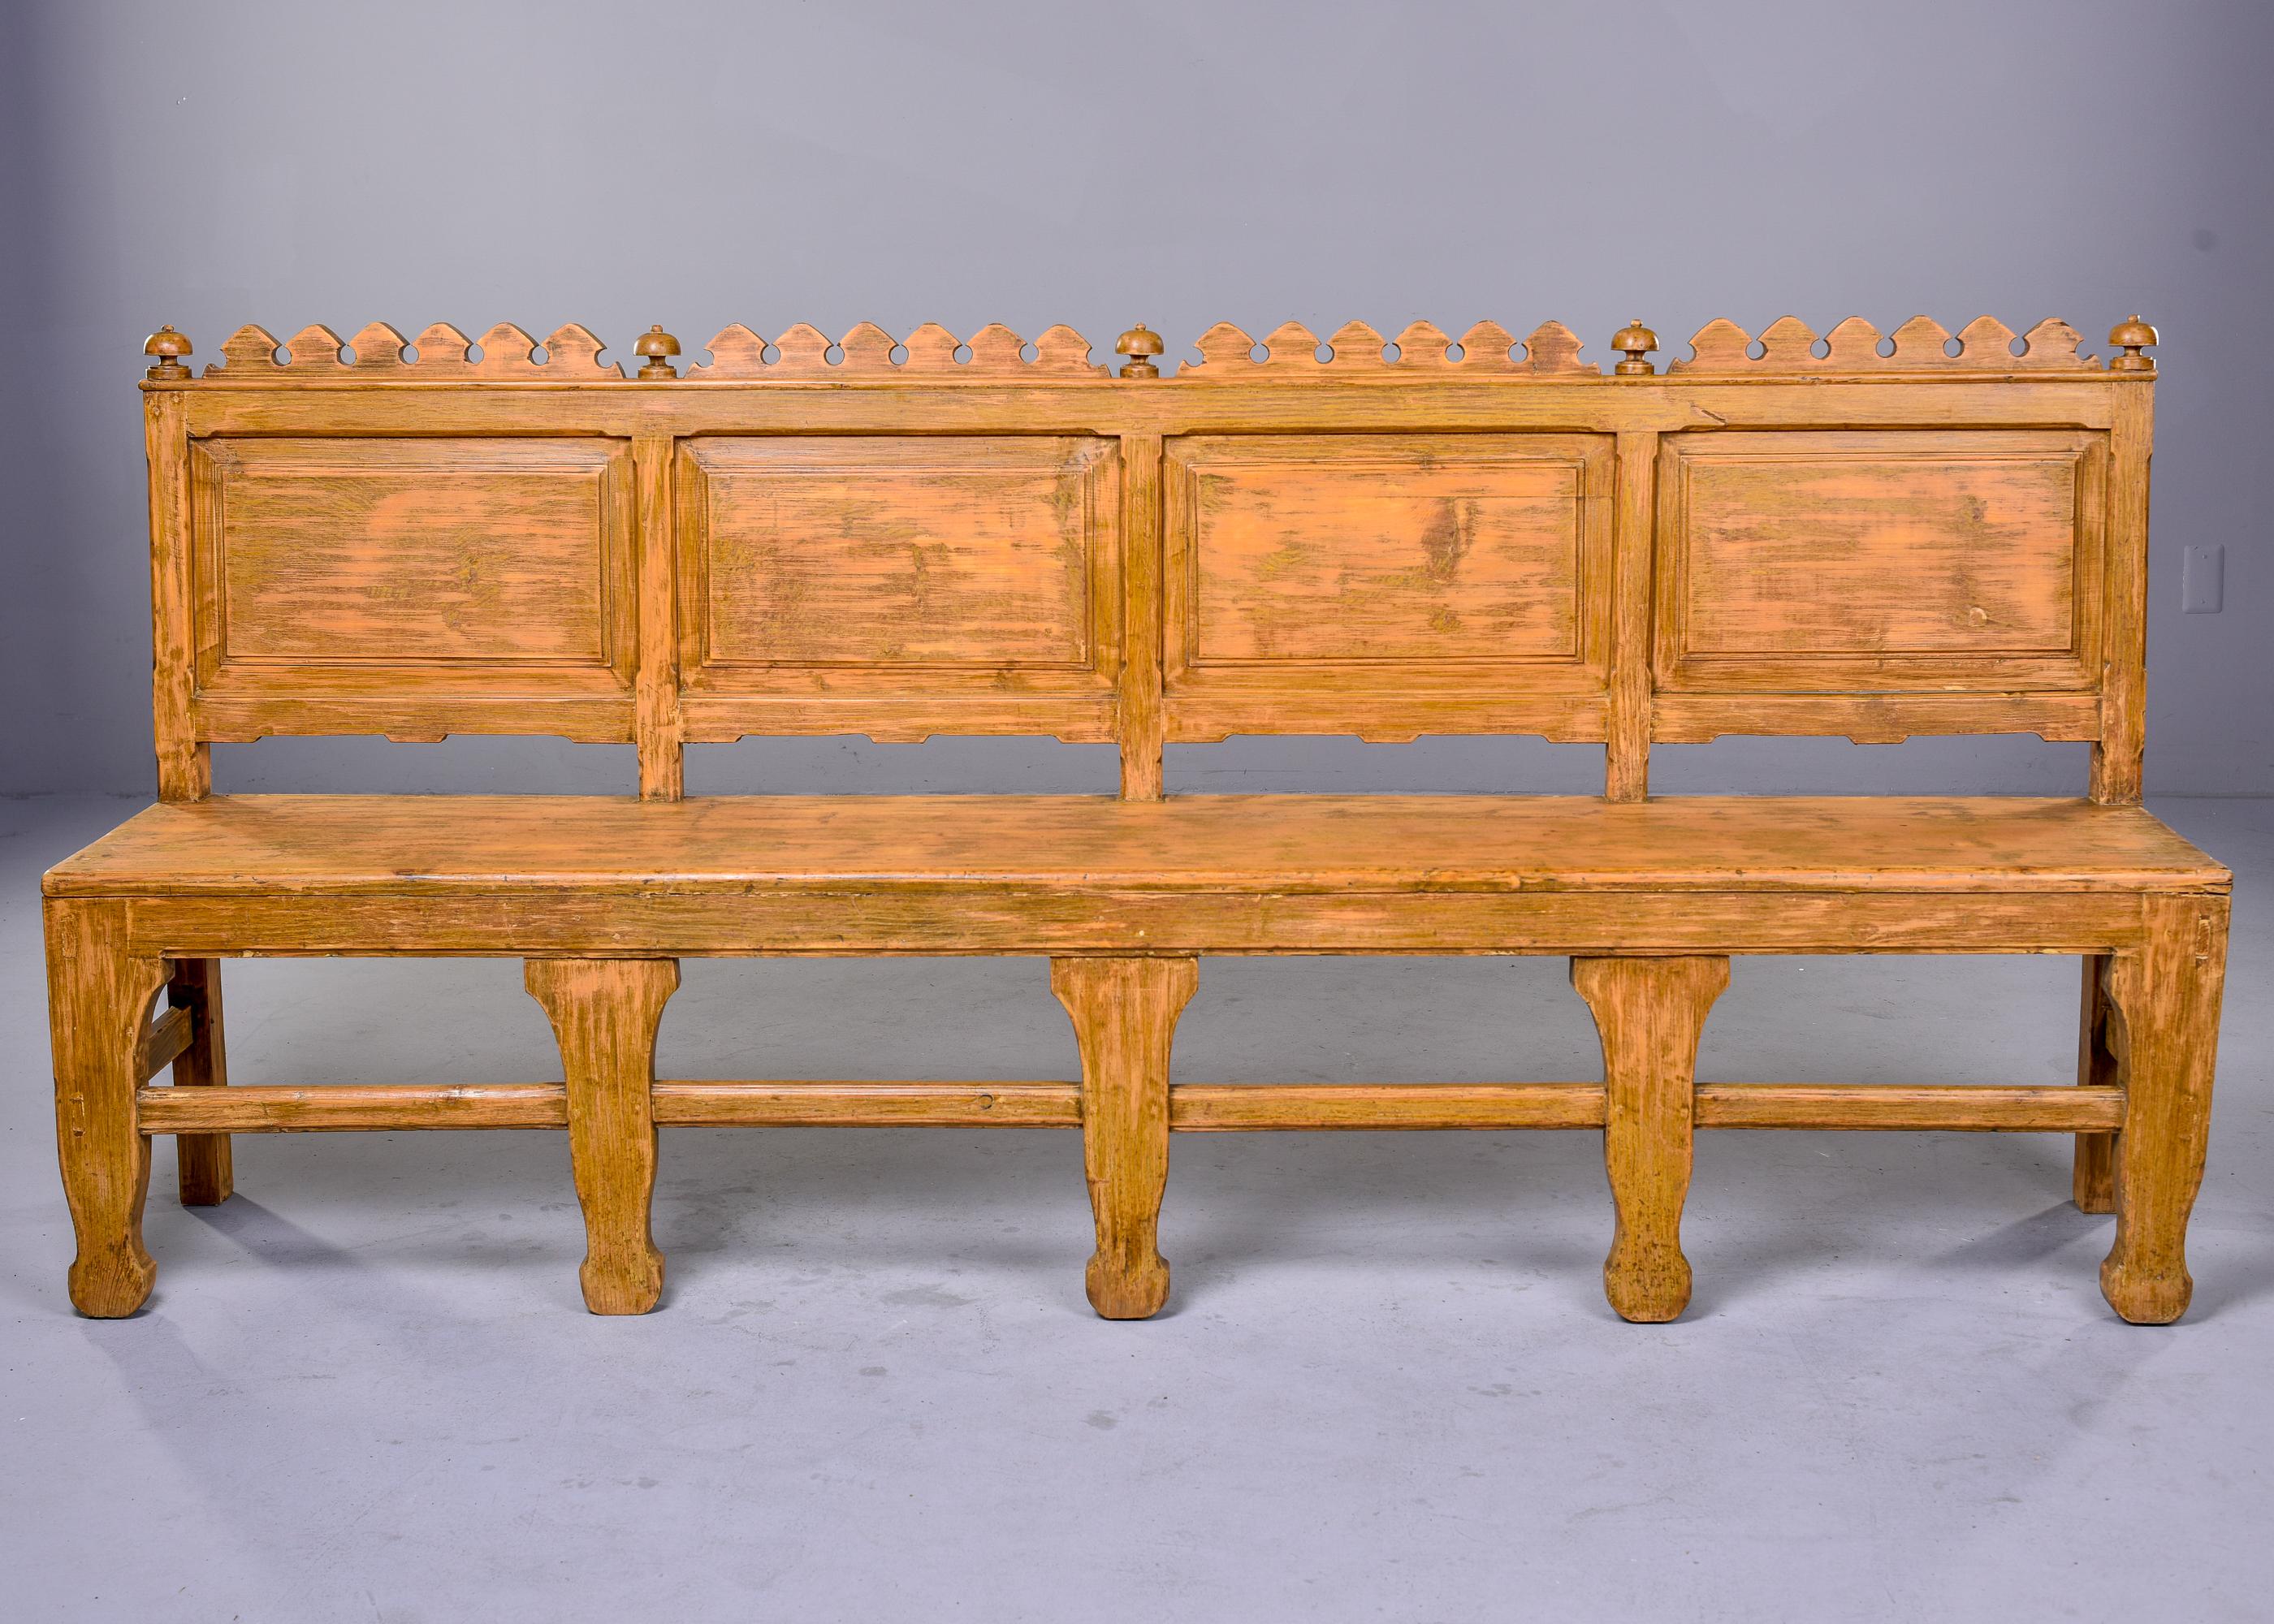 Wood Large 19th C English Painted and Carved Bench